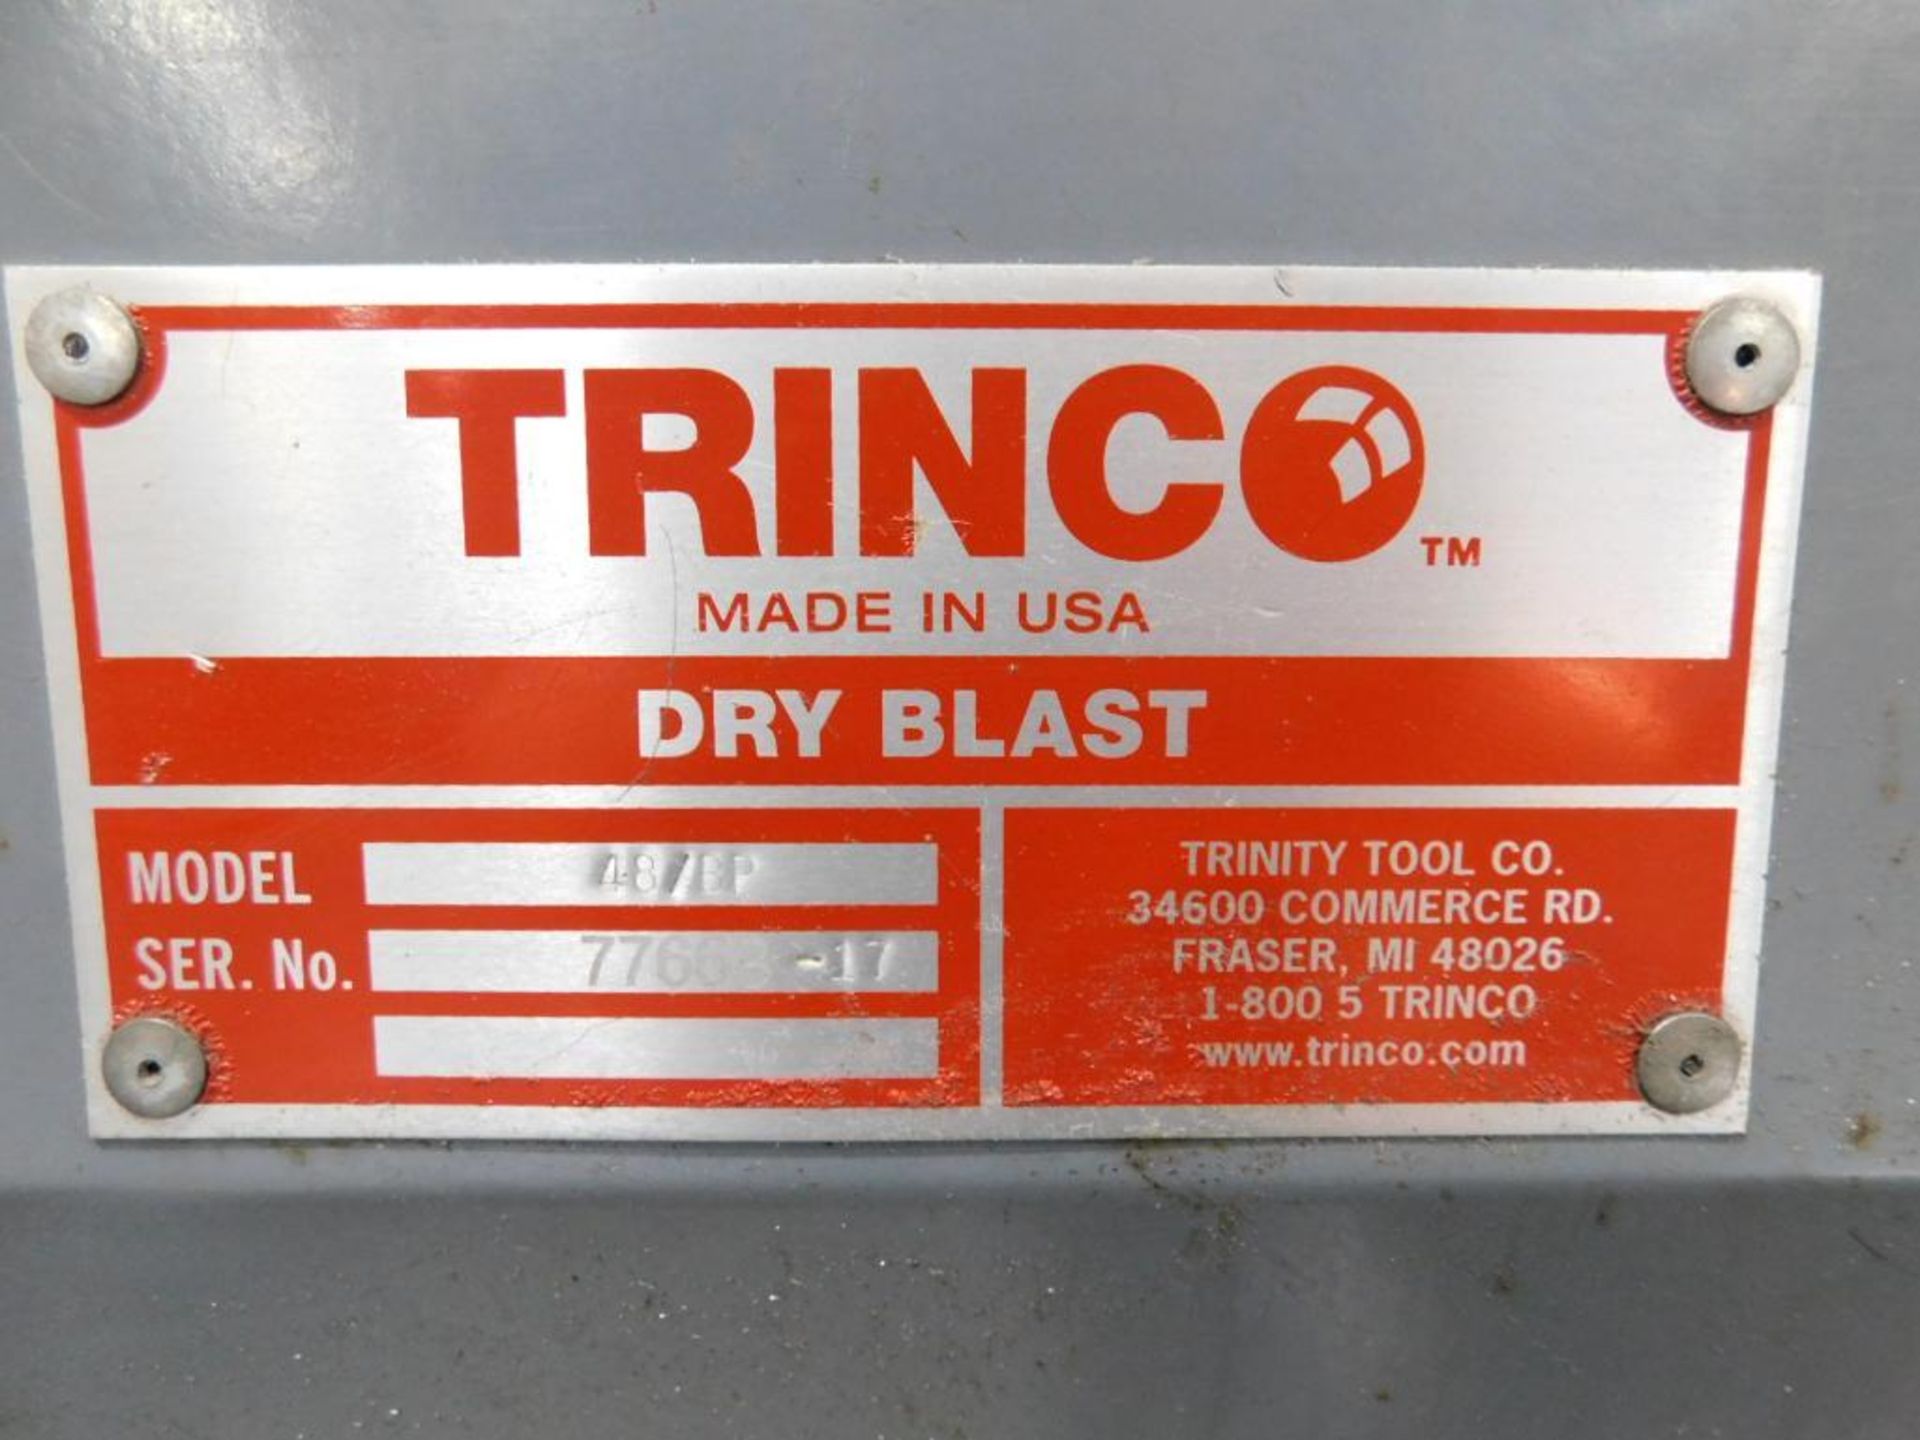 Trinco 48/BP 4-Hole Reach-In Blast Cabinet w/BP2 Dust Collector - Image 8 of 8